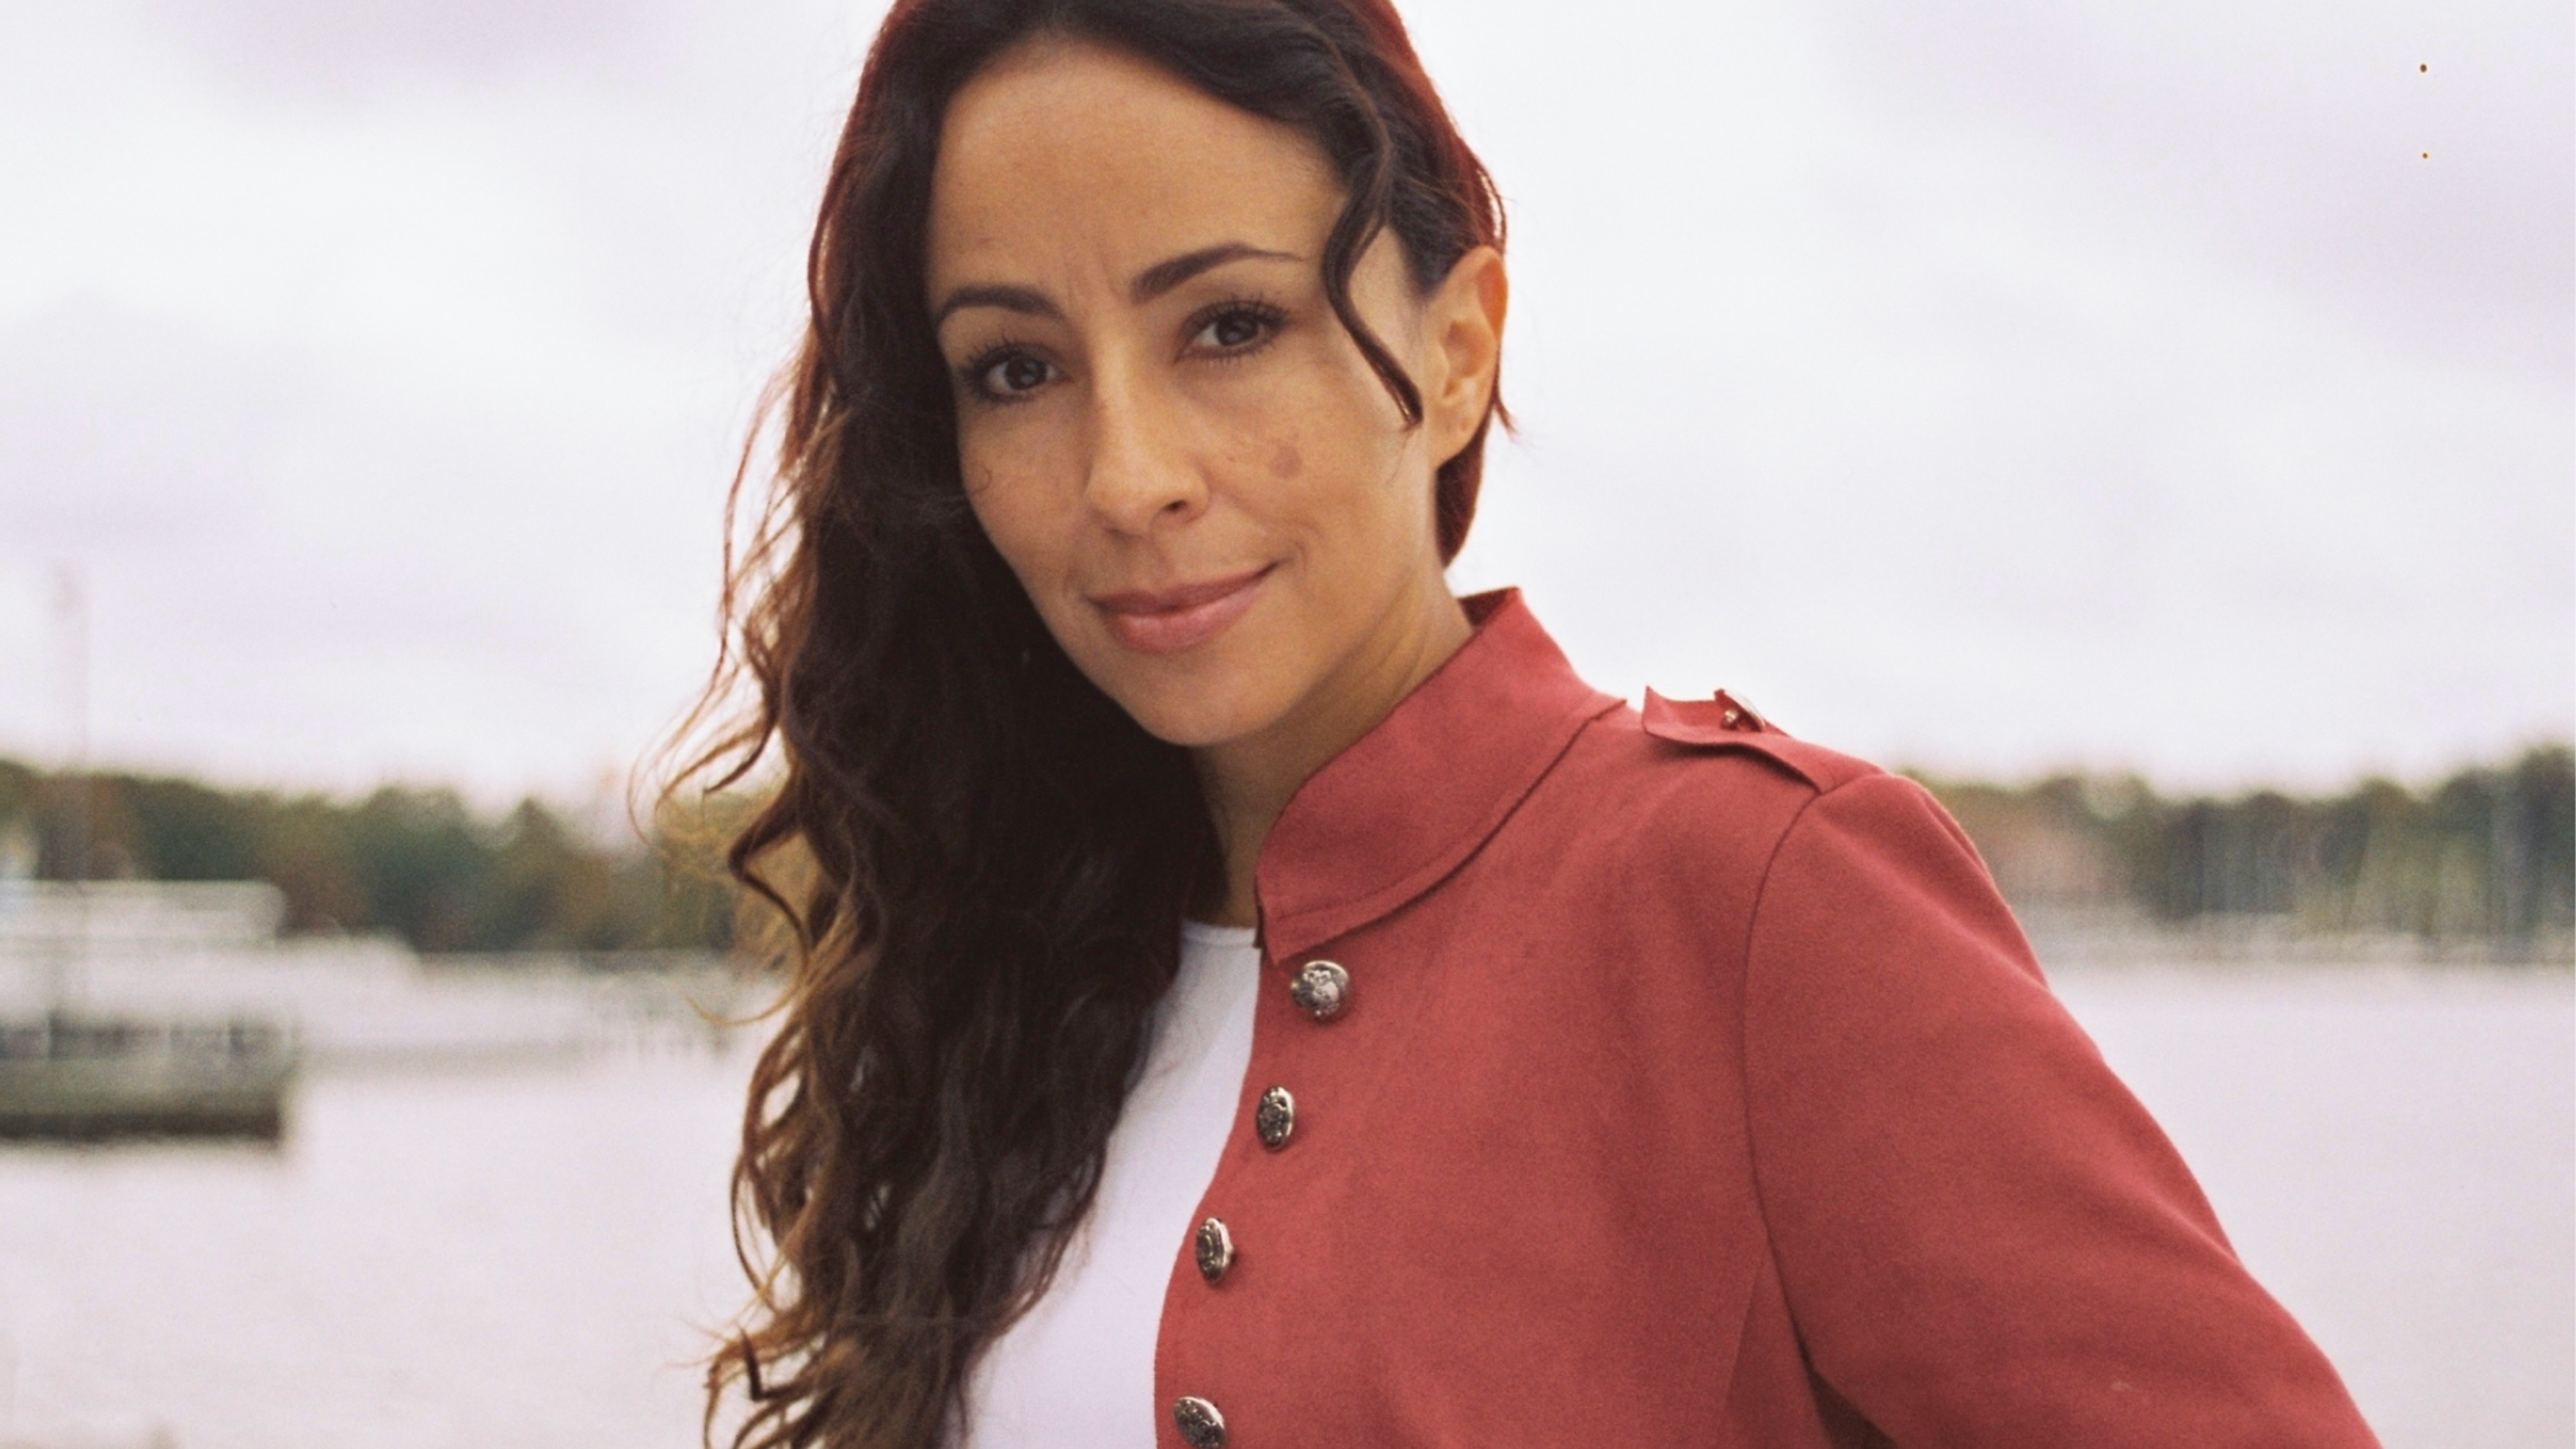 Woman with brown hait and a red jacket.